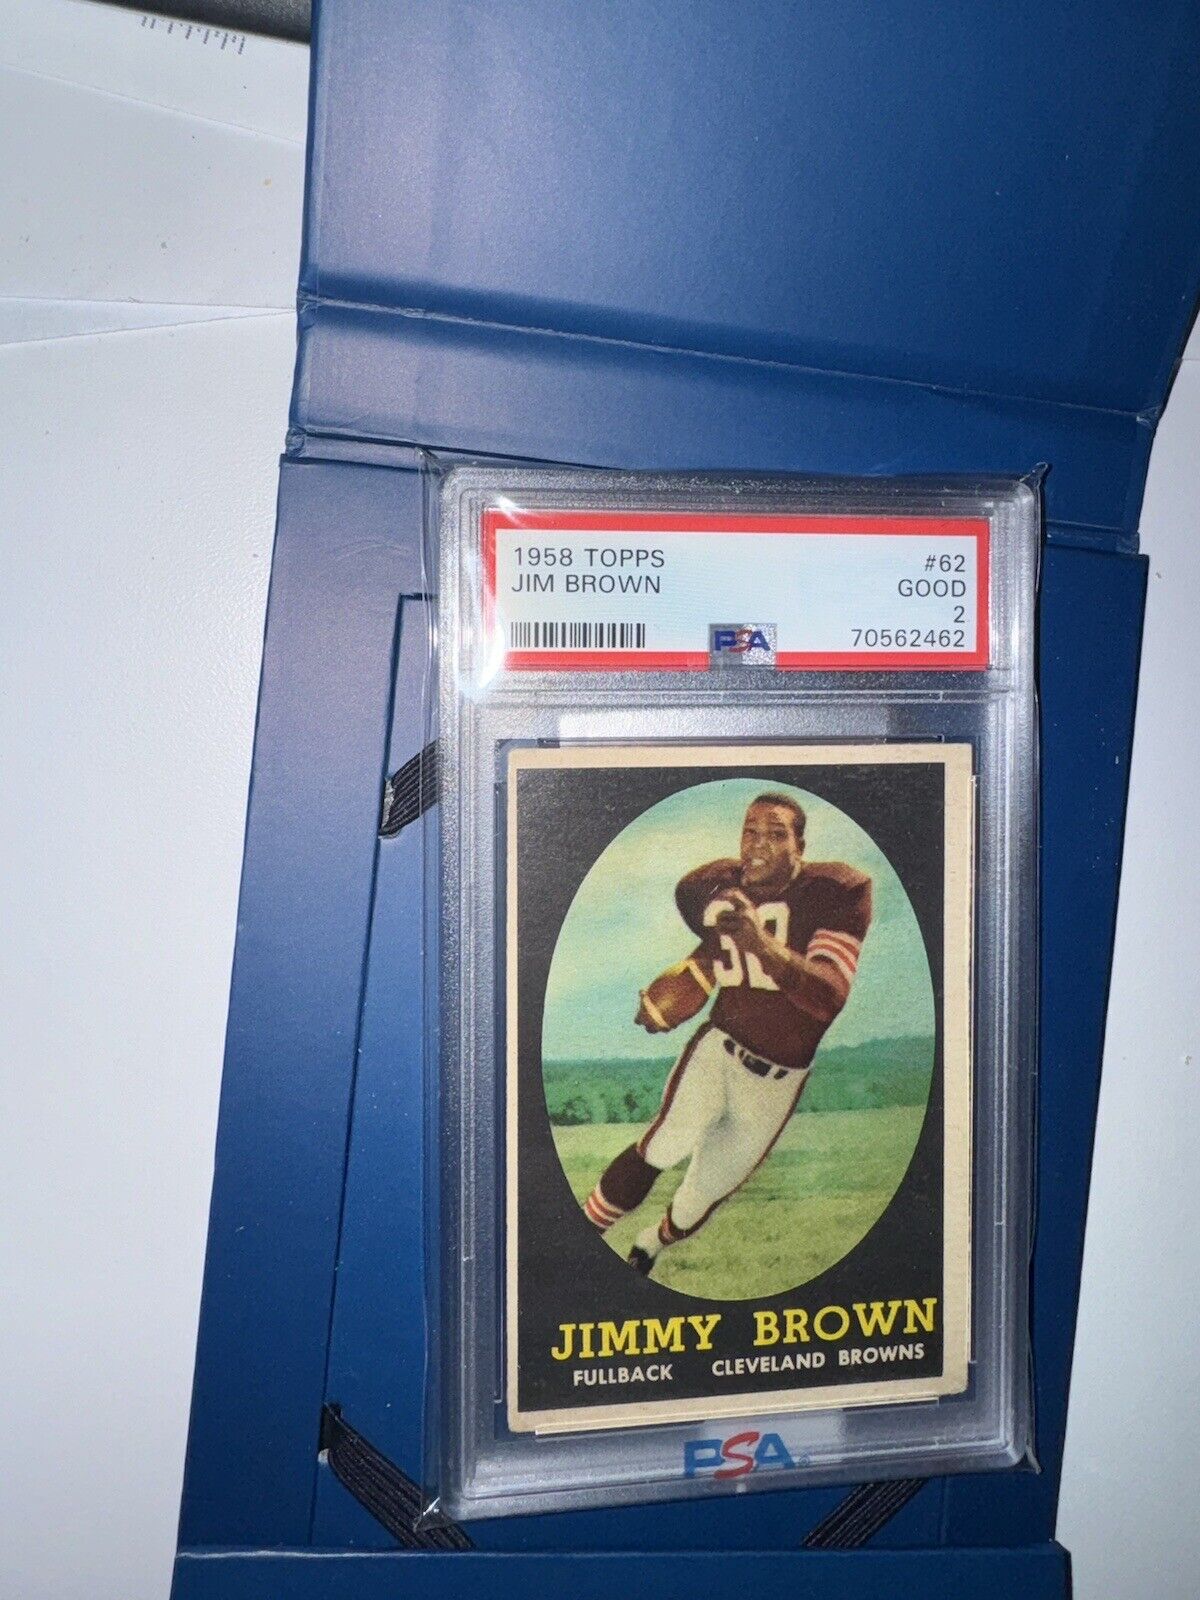 1958 Topps NFL #62 Jim Brown Rookie Card, Graded PSA 2